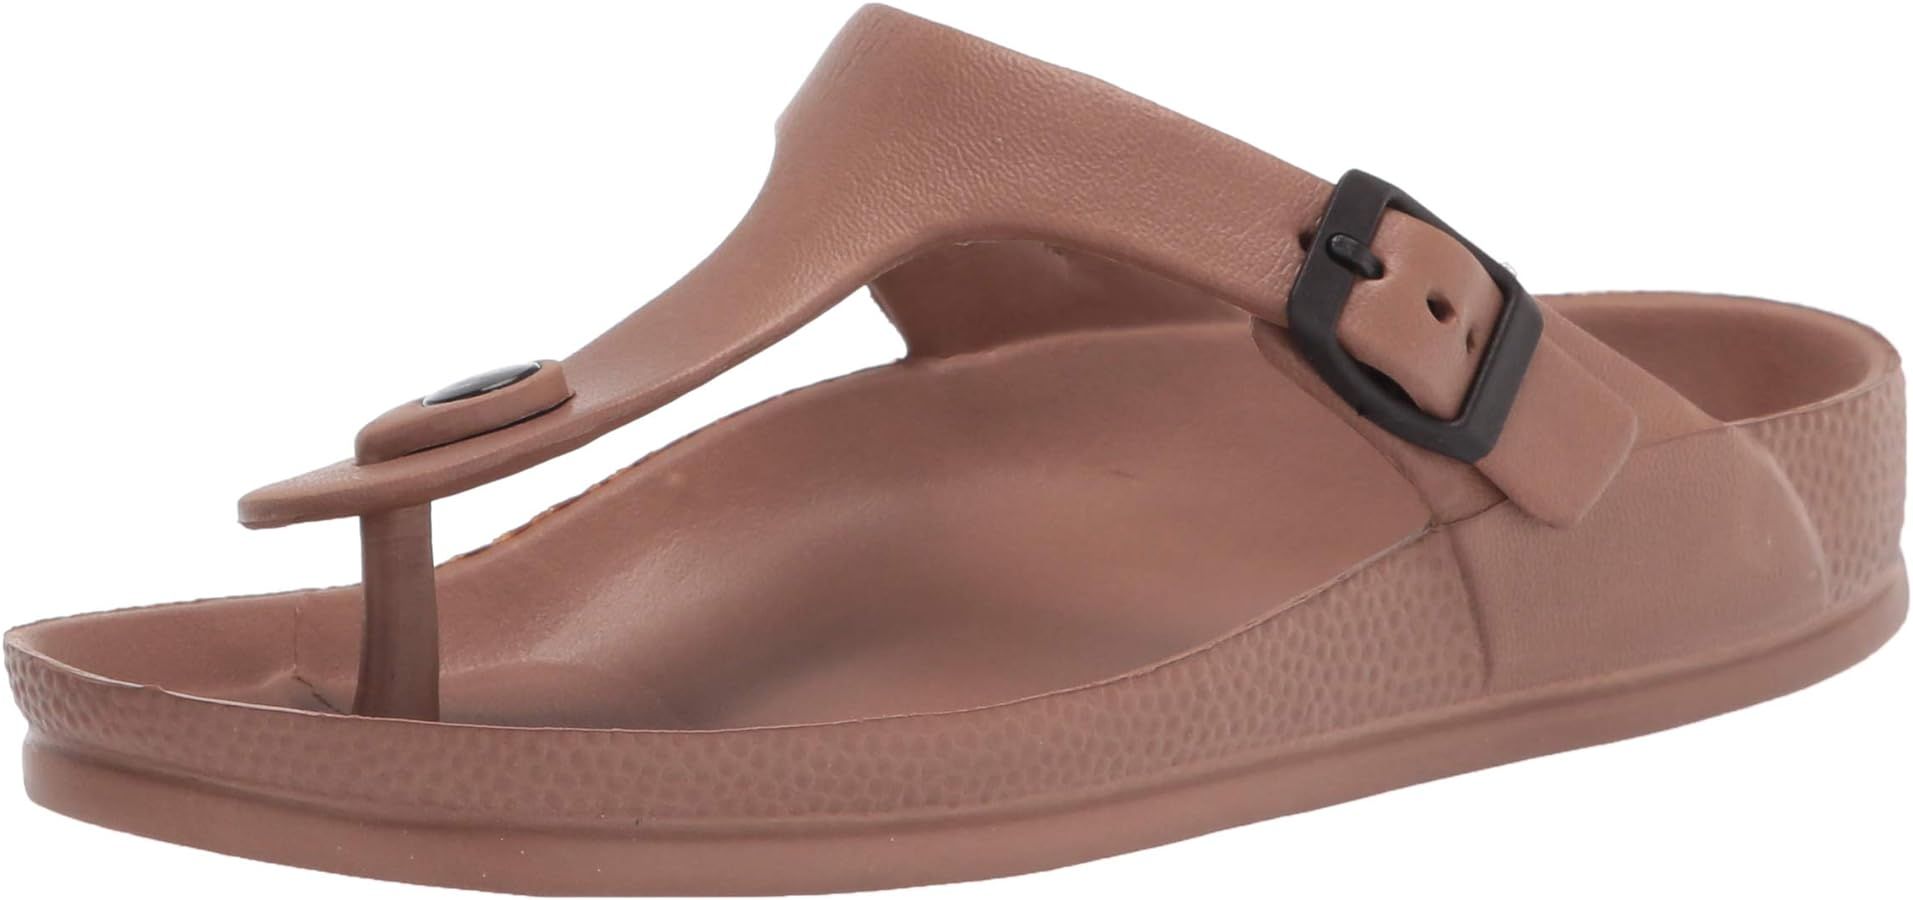 Luffymomo Comfort Footbed Eva Flip fiop Thong Sandals for Womens | Amazon (US)